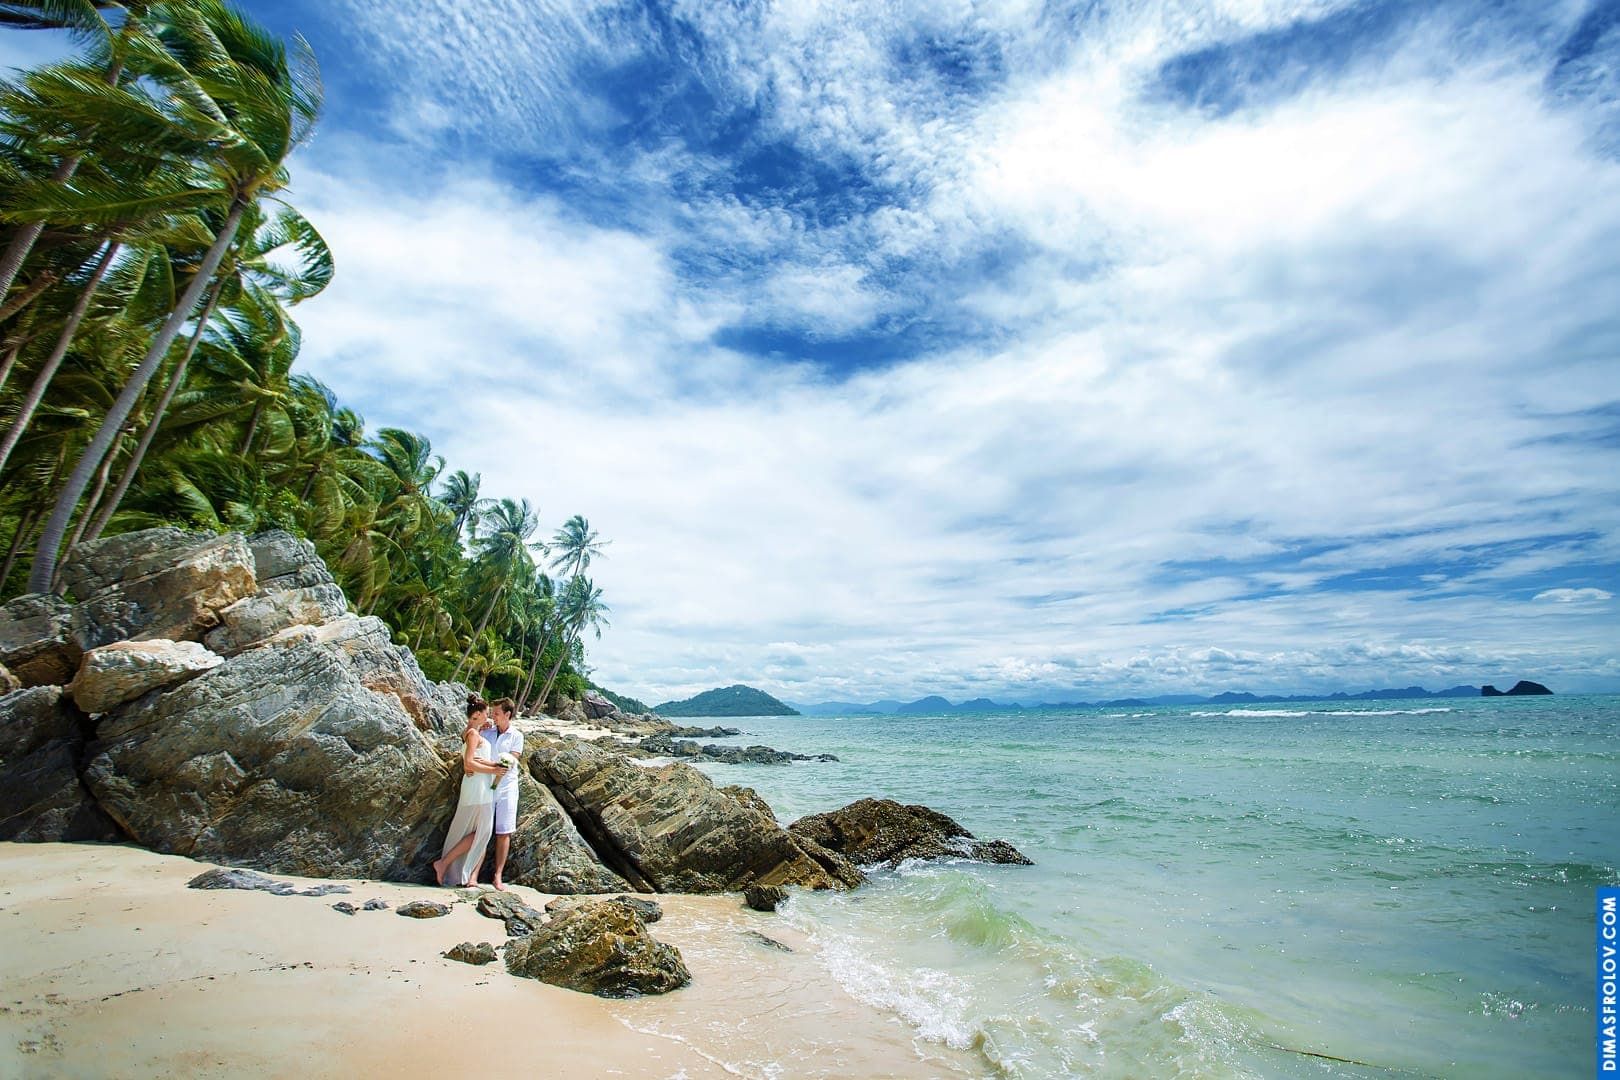 Location: The wild beach with rocks and coconut trees. photographer Dimas Frolov. photo1237